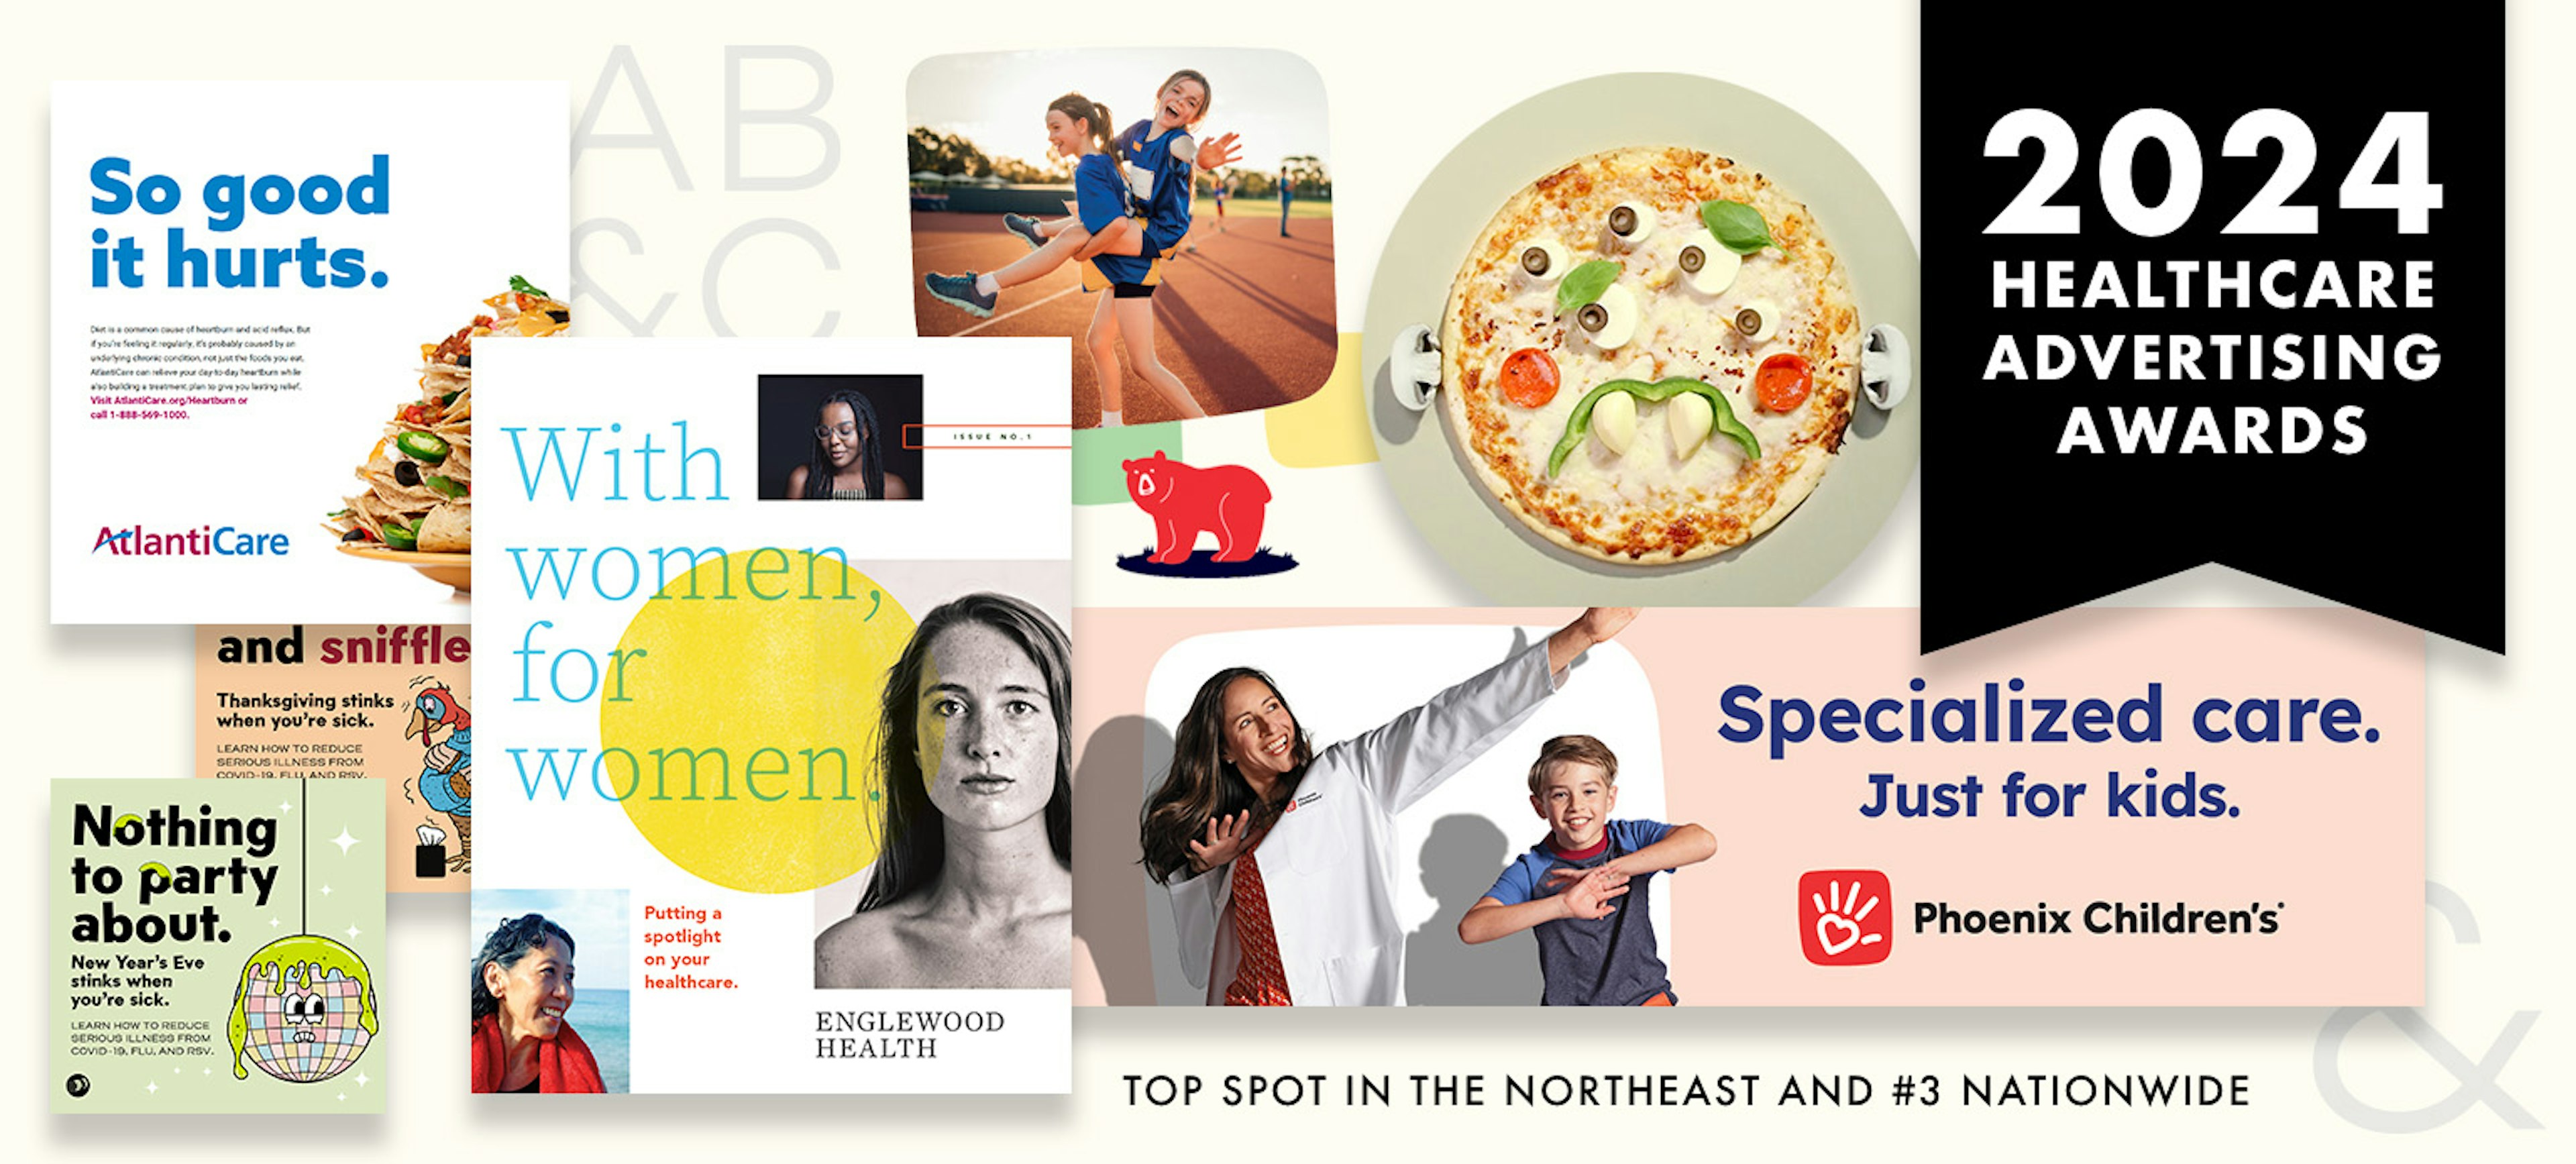 Aloysius Butler & Clark Shows Up Big in the Healthcare Advertising Awards—Winning More Recognitions Than Any Other Agency in the Northeastern U.S.